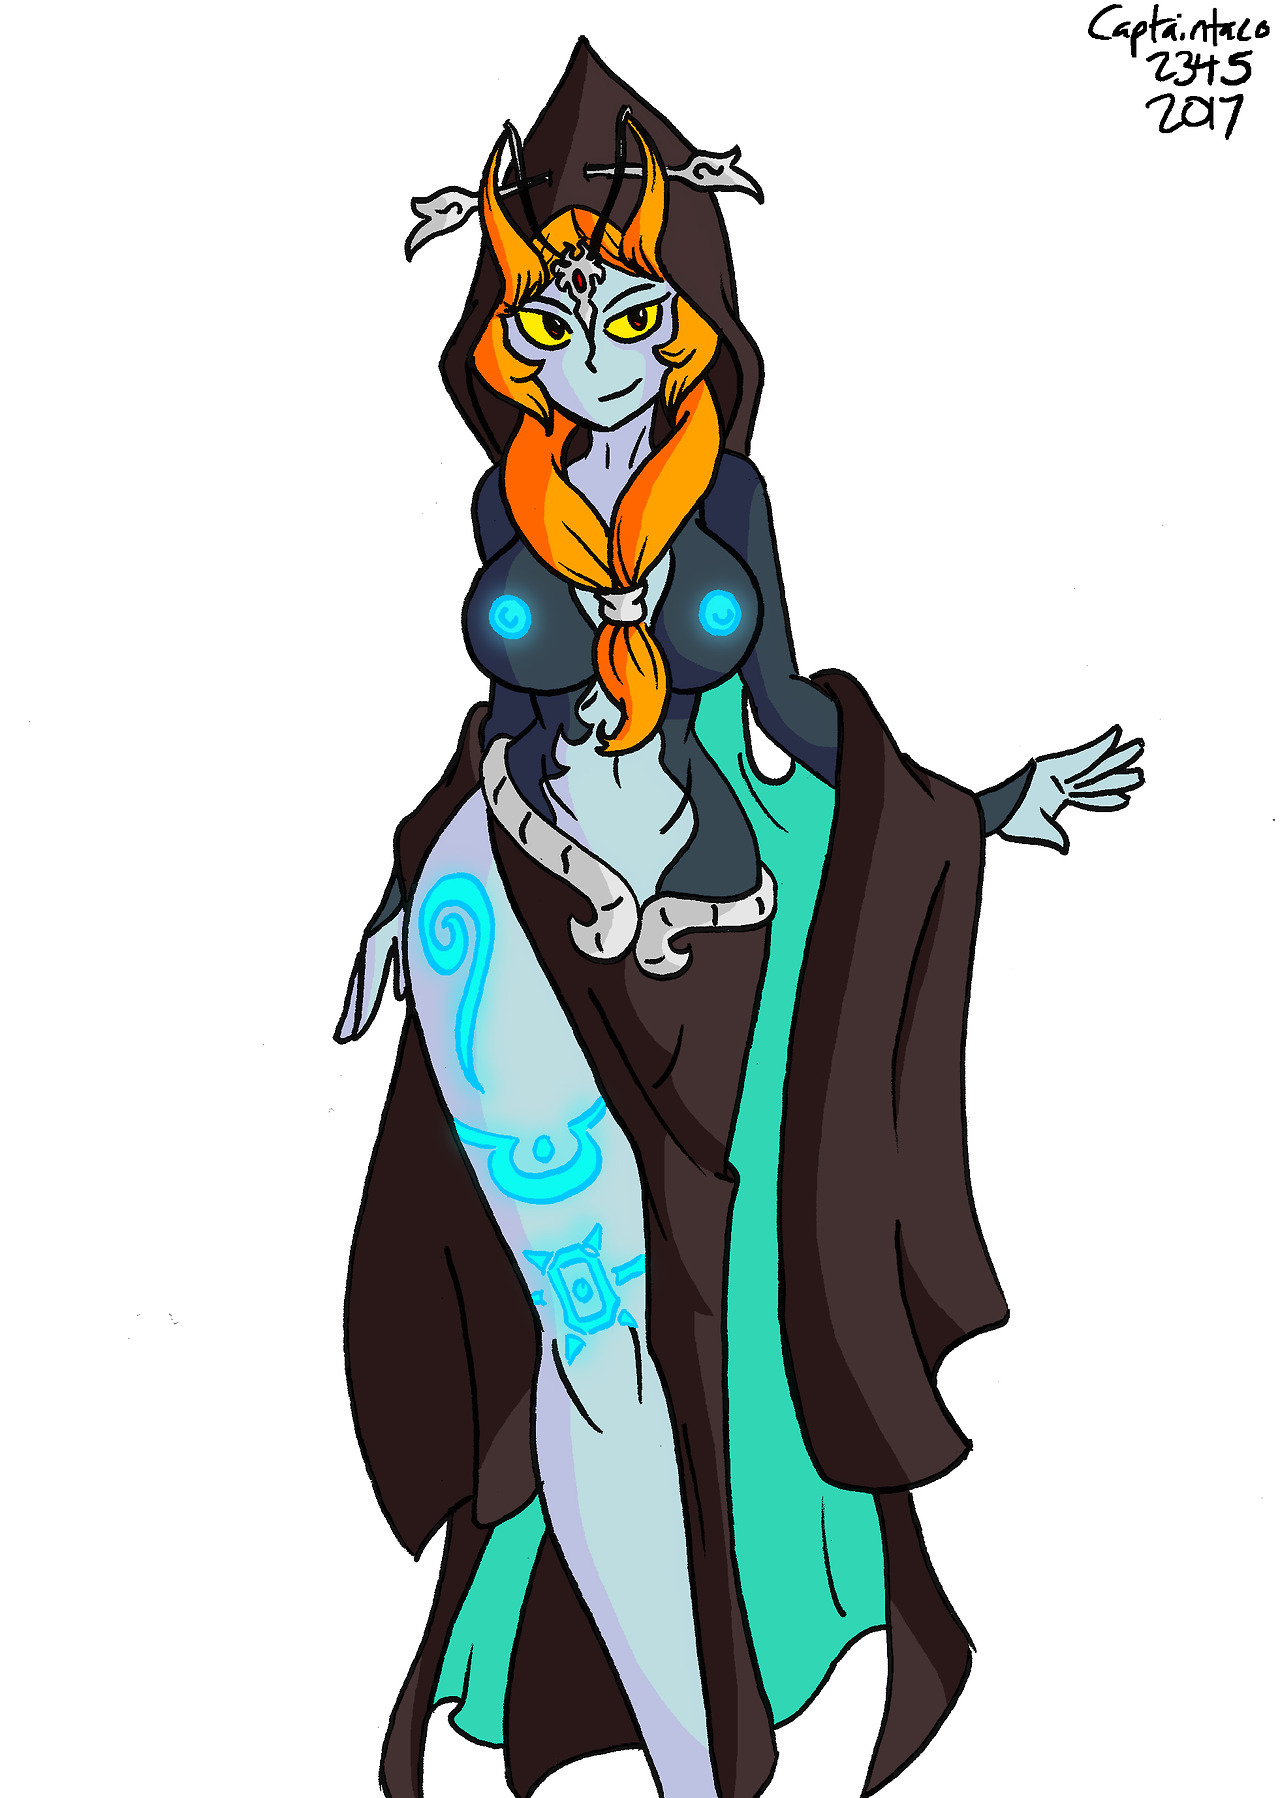 Midna from Zelda Twilight Princess. I’ve been wanting to draw her for a while now,